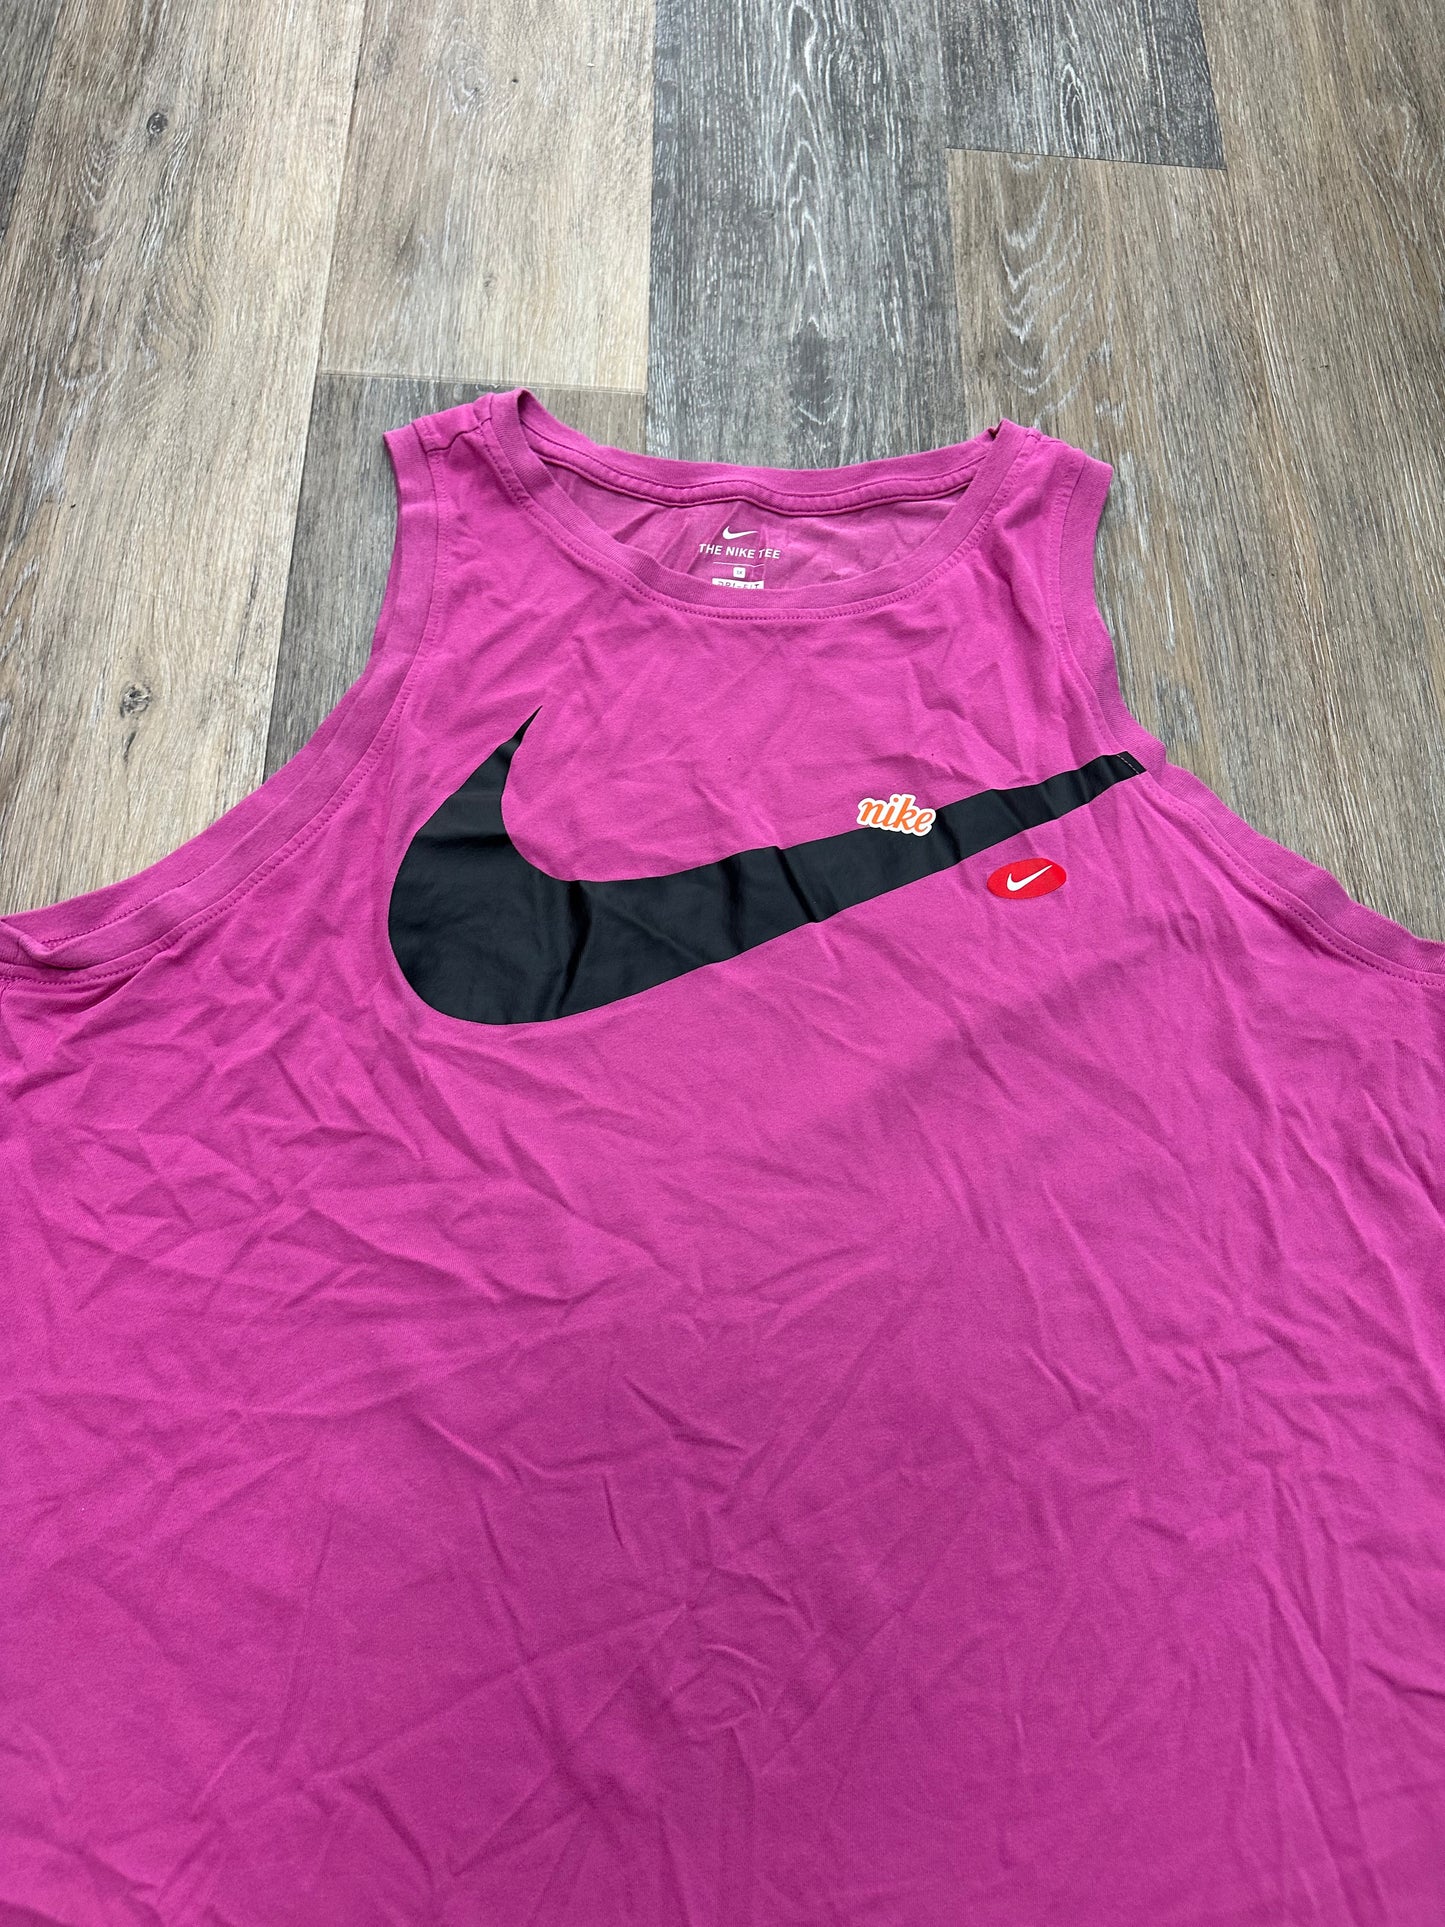 Athletic Tank Top By Nike Apparel  Size: 1x